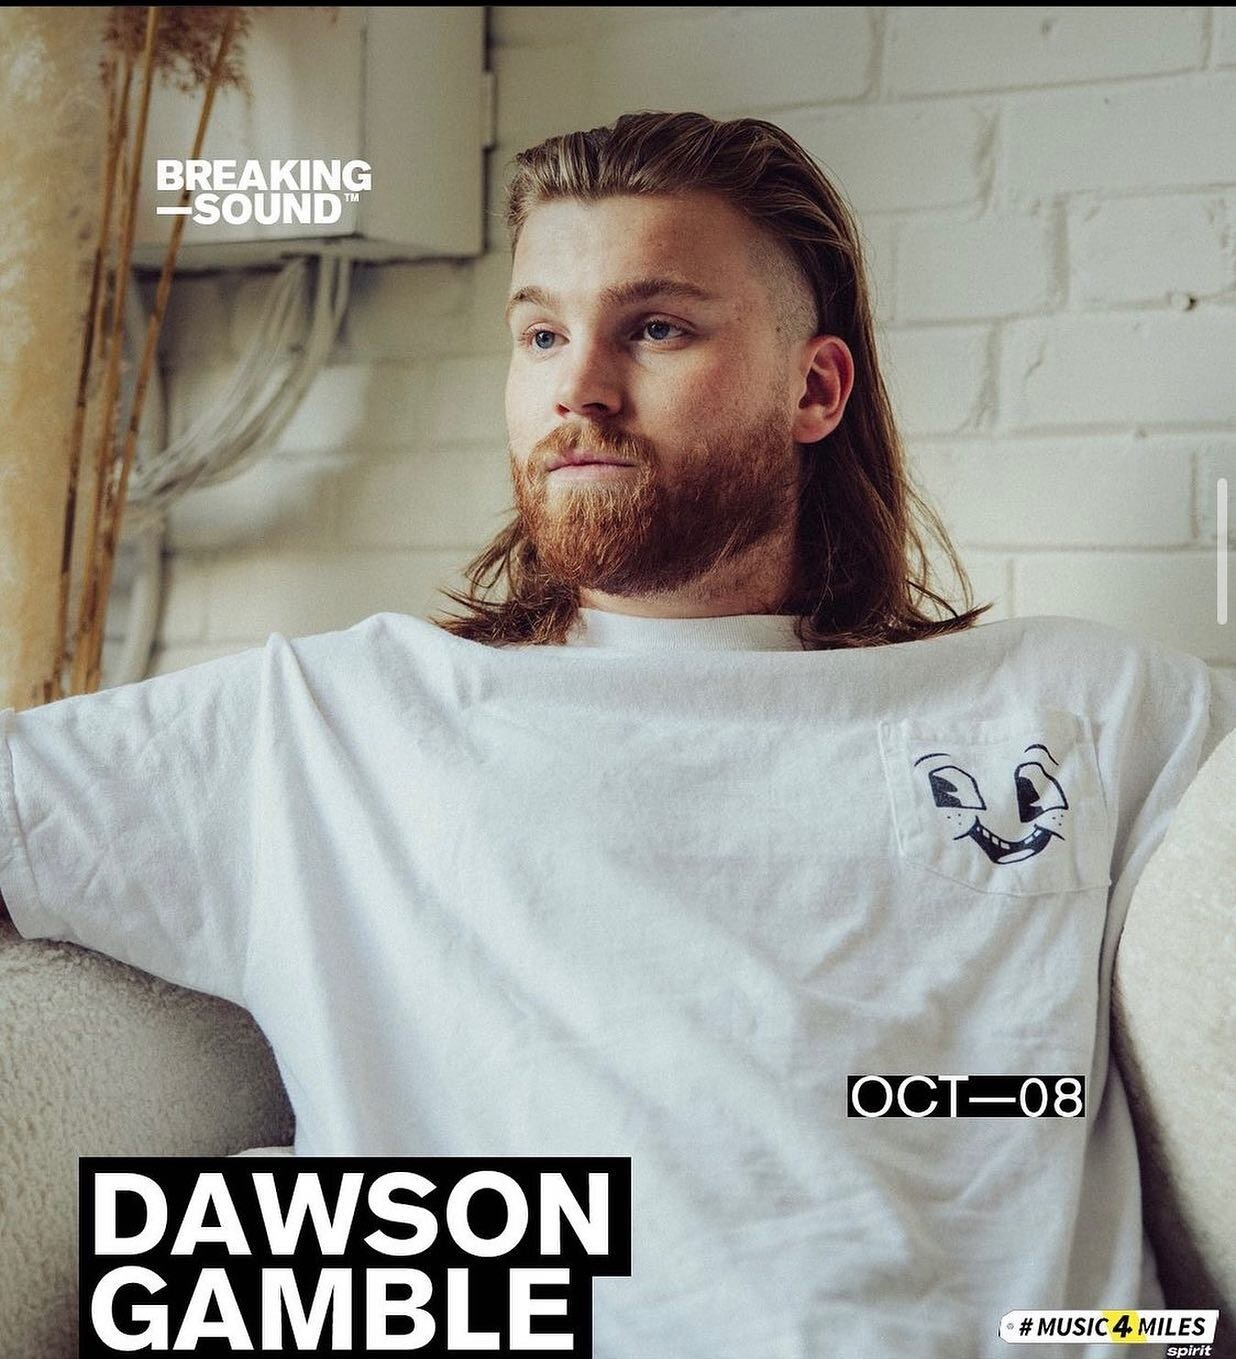 Tomorrow! Catch me playing a set with @dawson.gamble at @thegarrisonto for @breakingsound super pumped for this one you don&rsquo;t want to miss it 🫠
&bull;
&bull;
&bull;
#drums #drummer #showcase #band #music #singer #songwriter #musician #talented